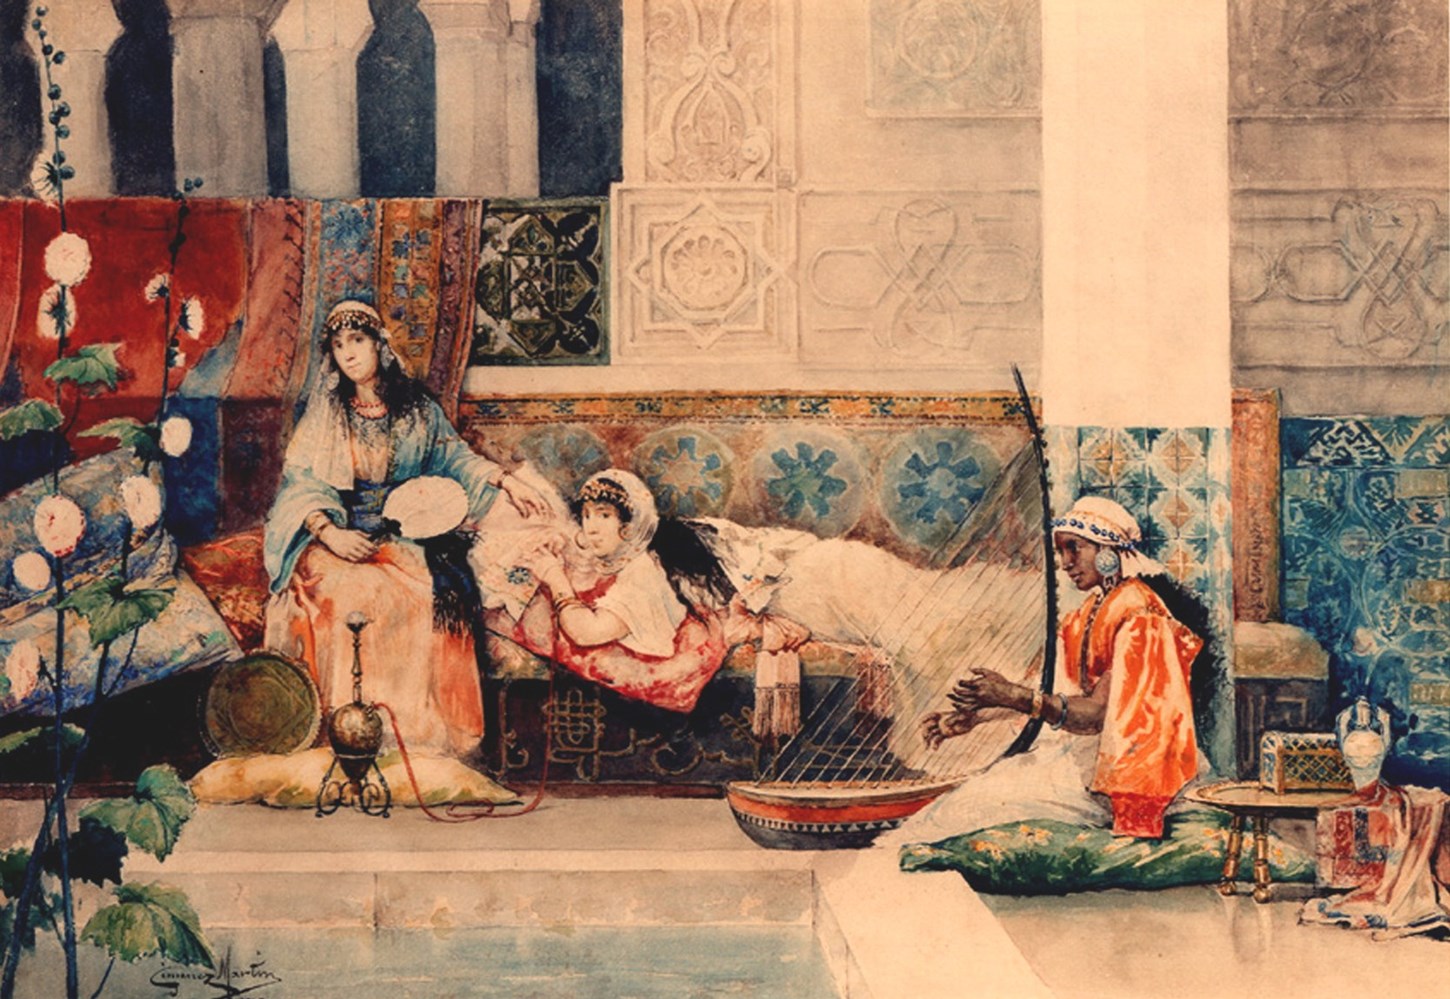 Relaxing in the Harem